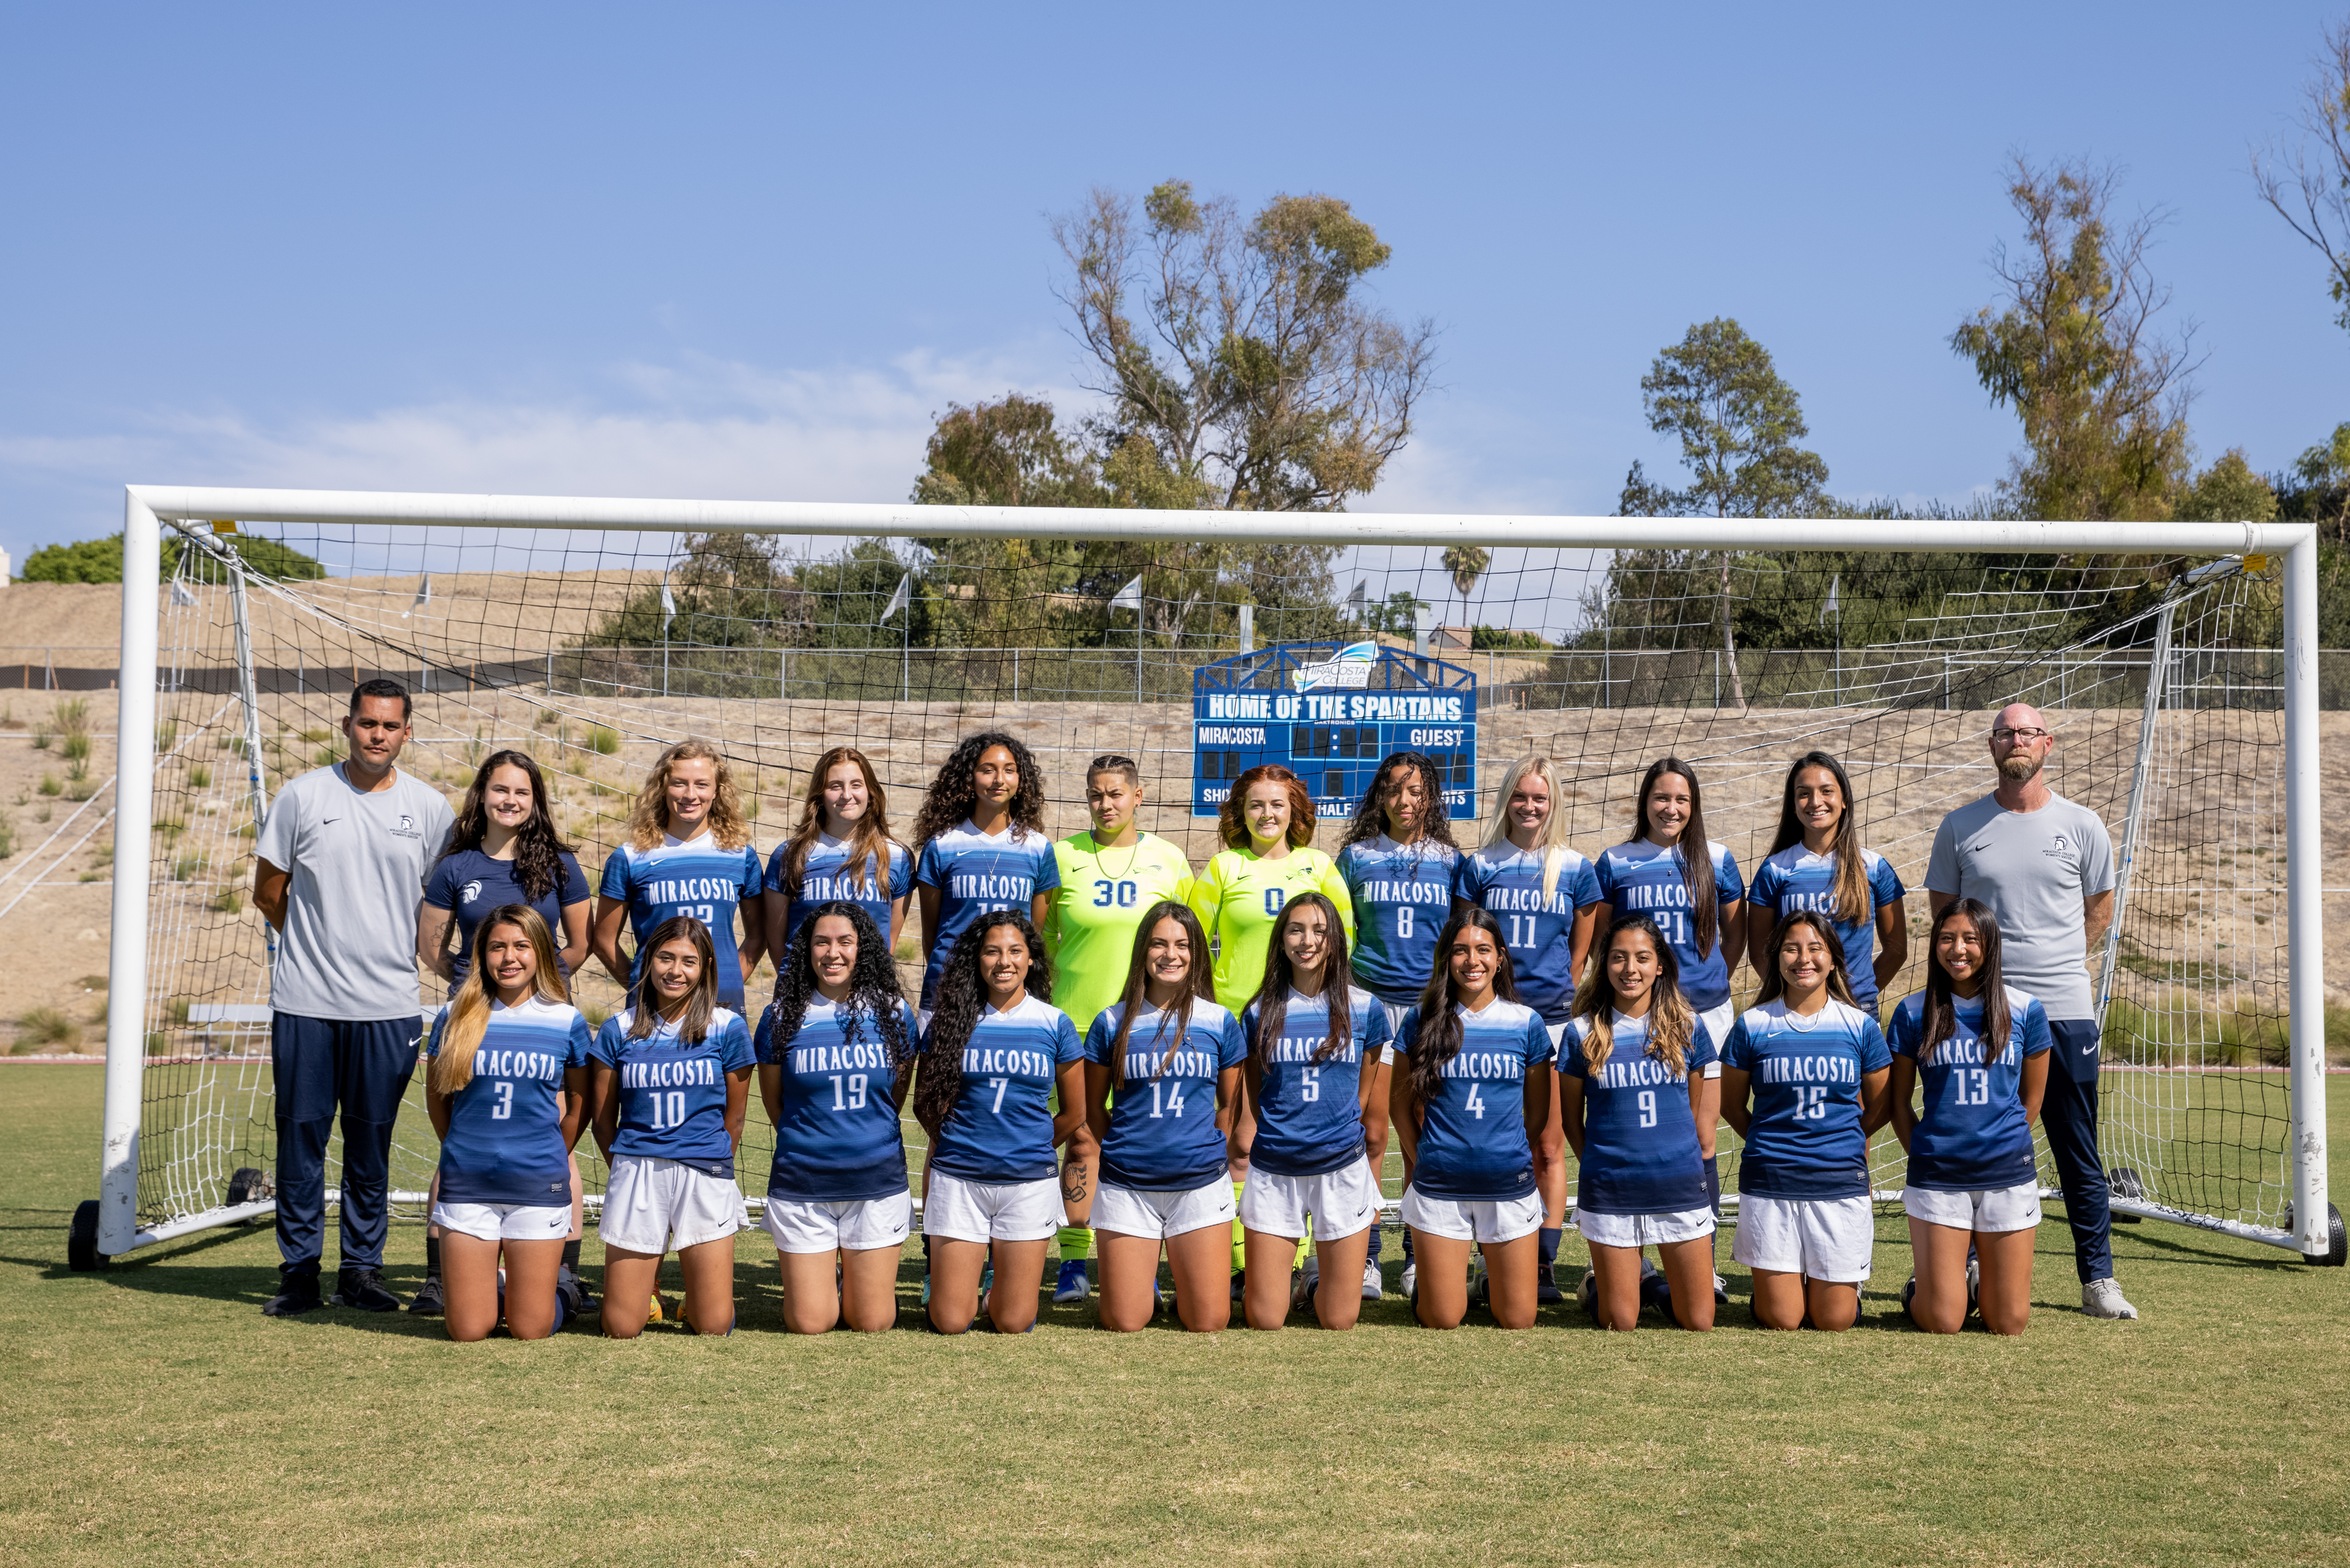 Women's soccer team picture.